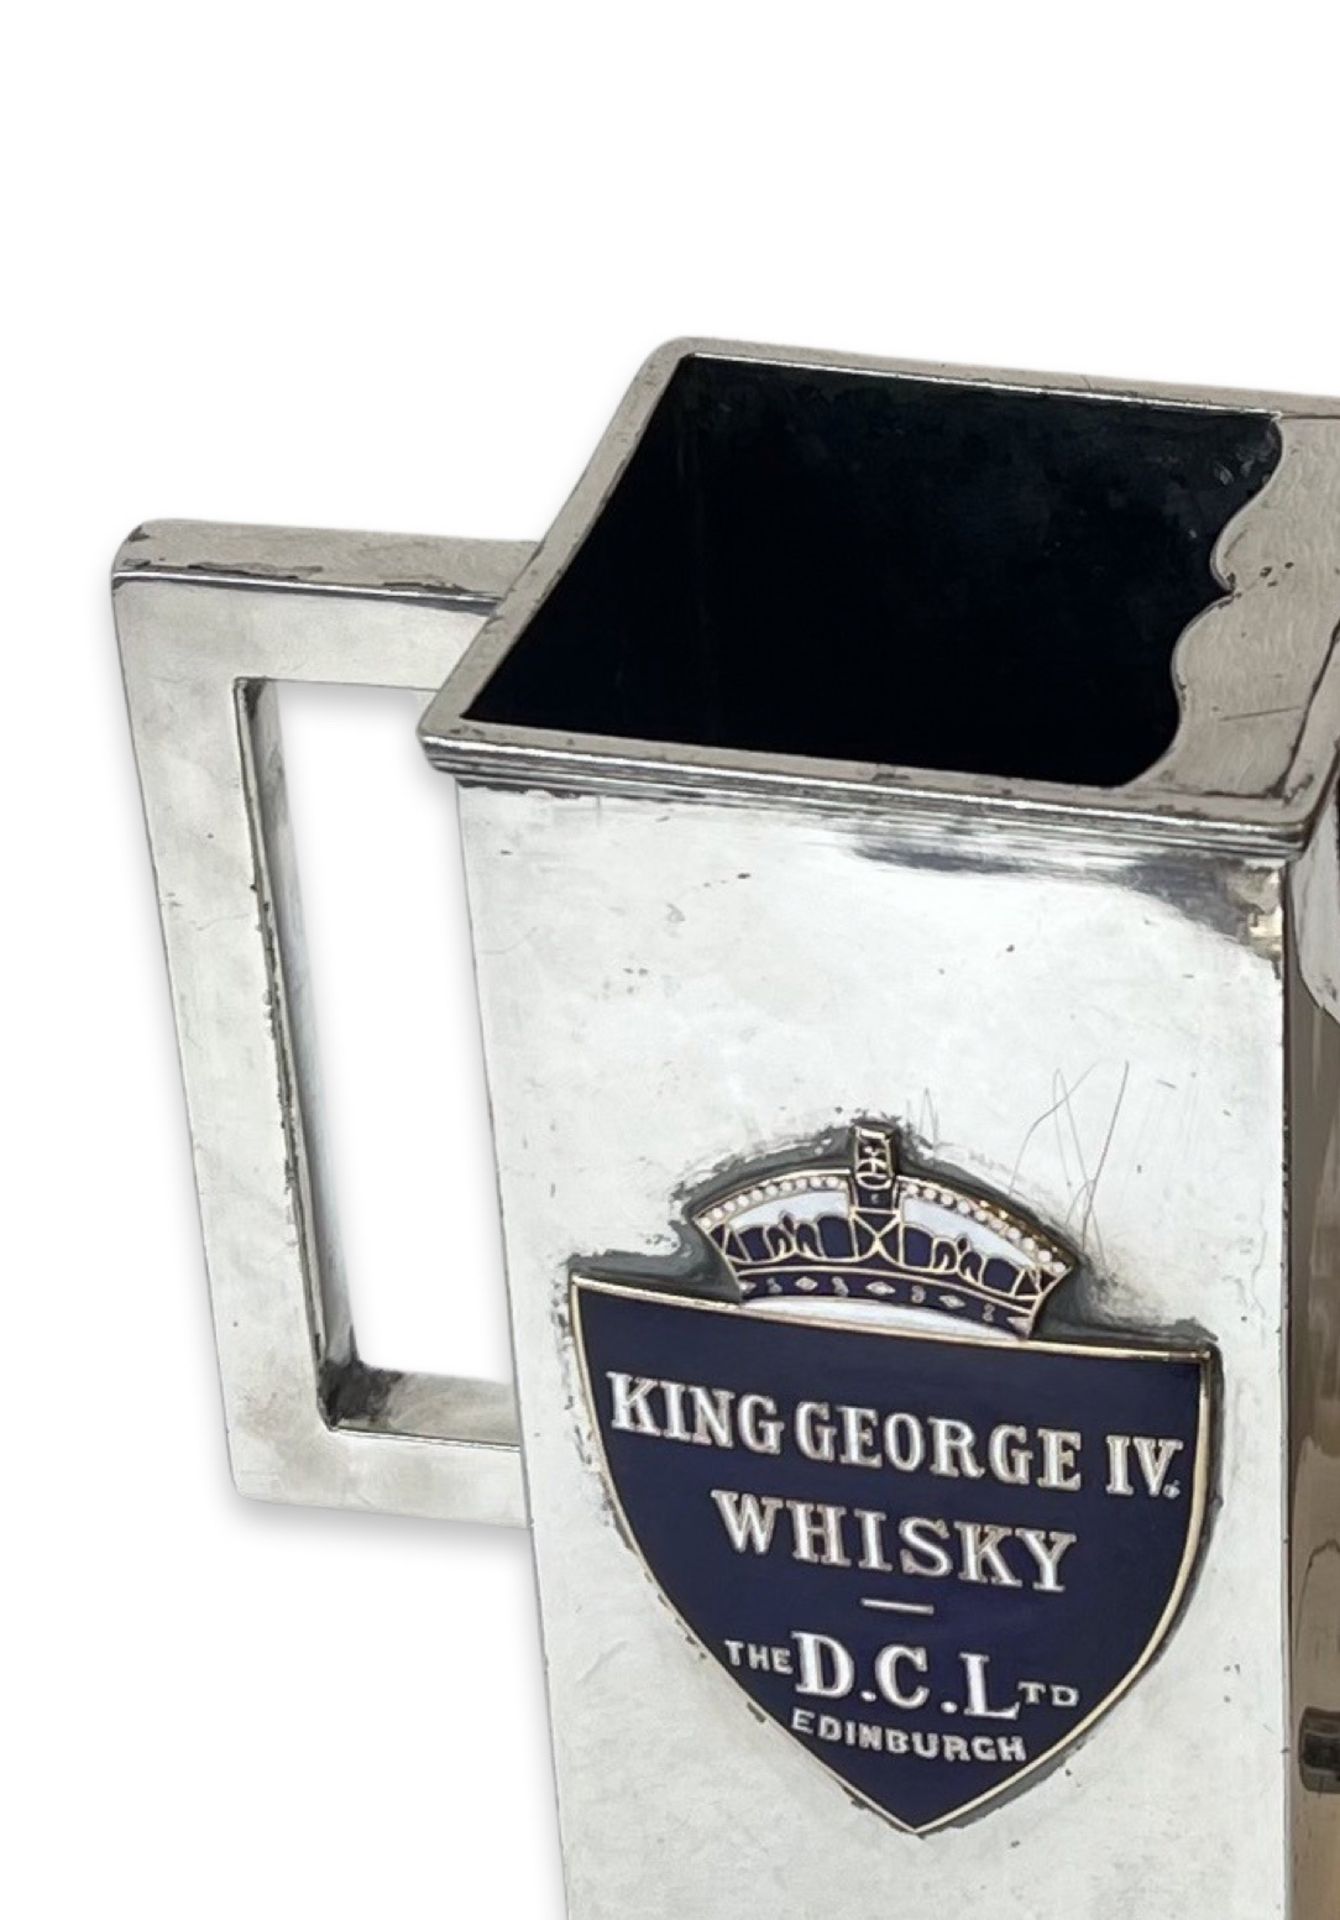 A RARE ART DECO SILVER PLATE AND ENAMEL 'KING GEORGE IV WHISKY' ADVERTISING JUG C. 1930 - Image 3 of 6